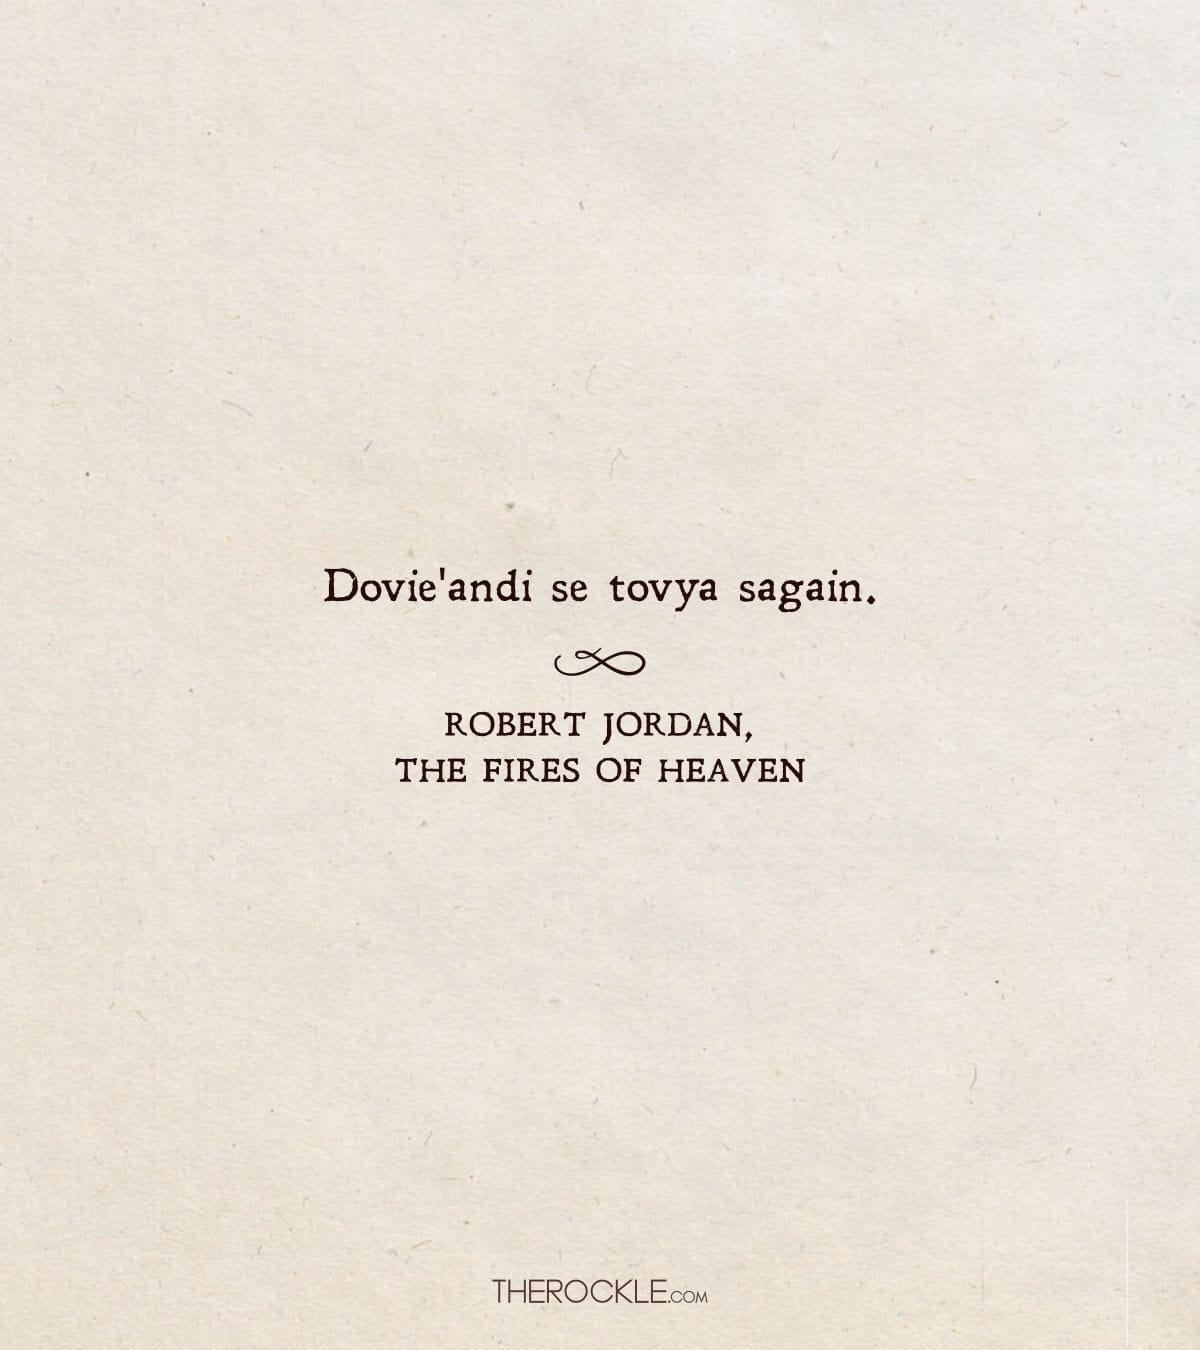 The Fires of Heaven quote